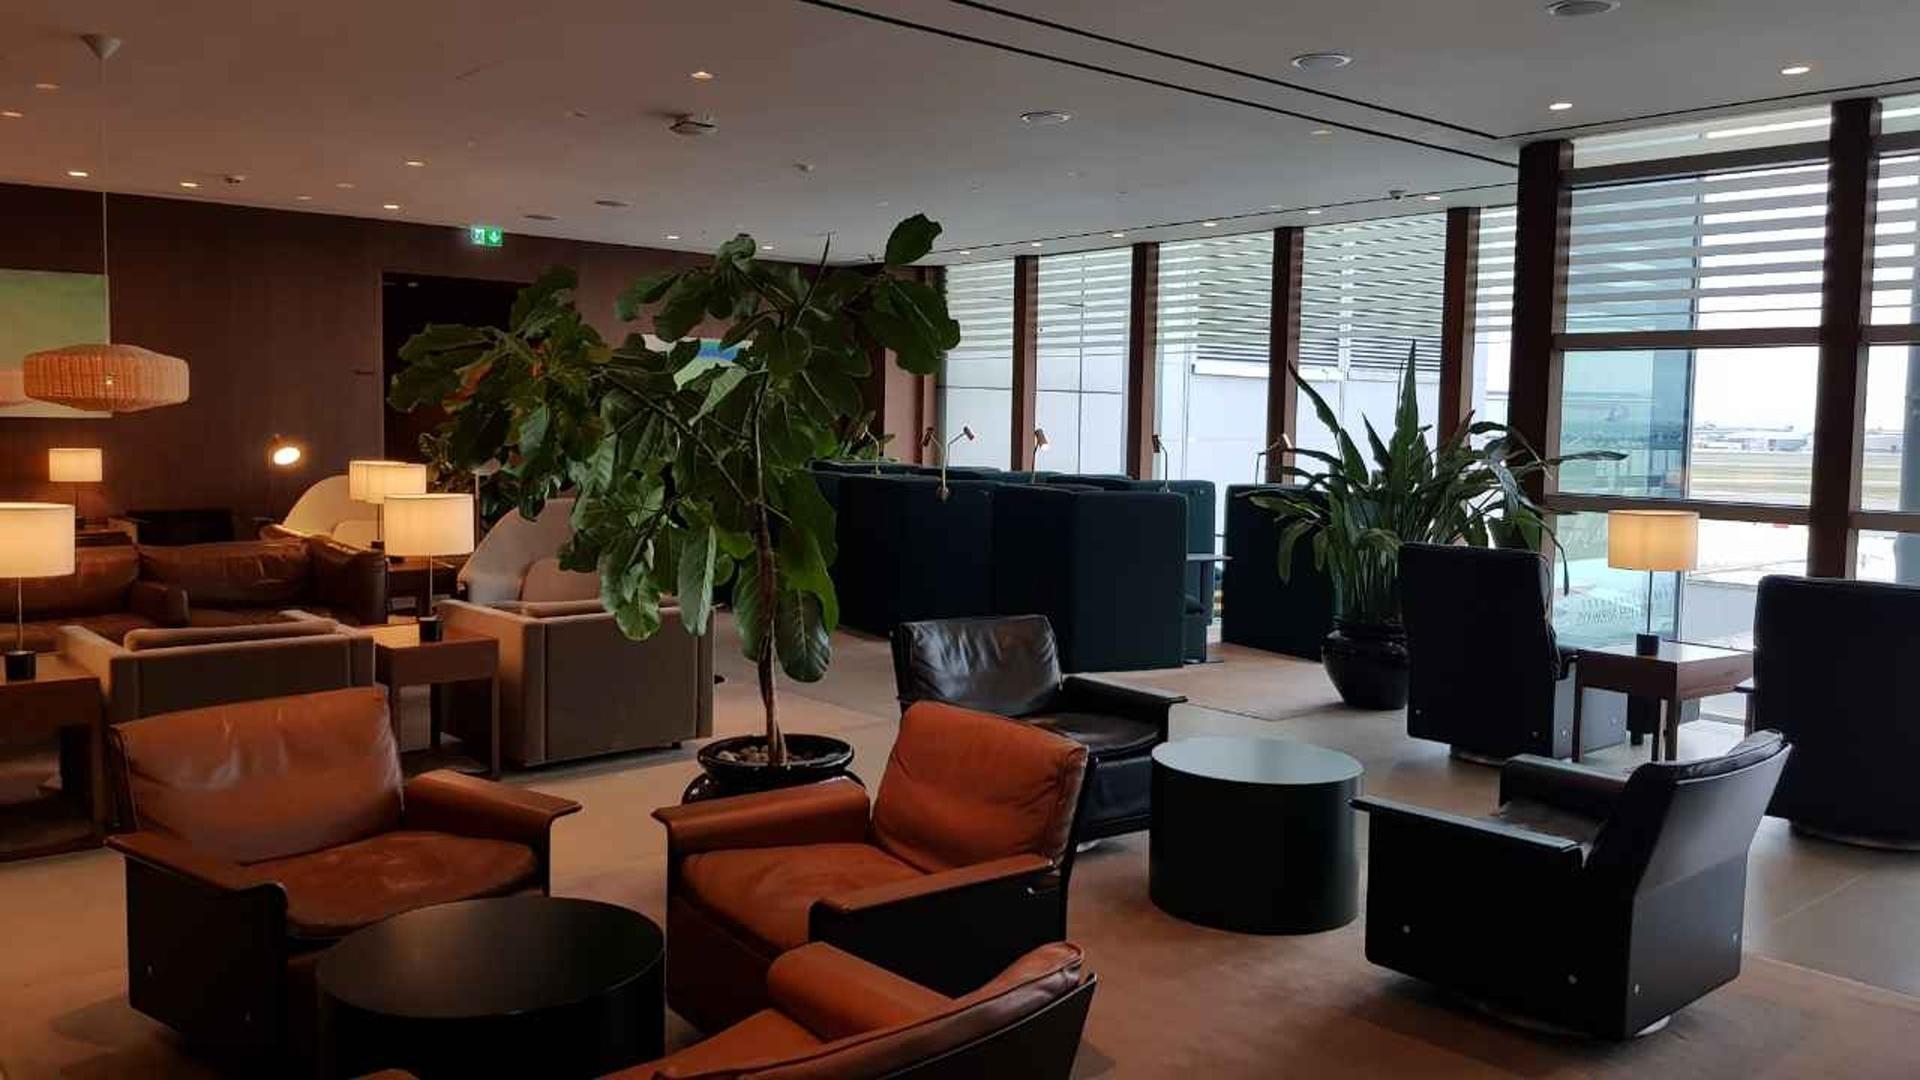 Cathay Pacific Business Class Lounge image 34 of 48